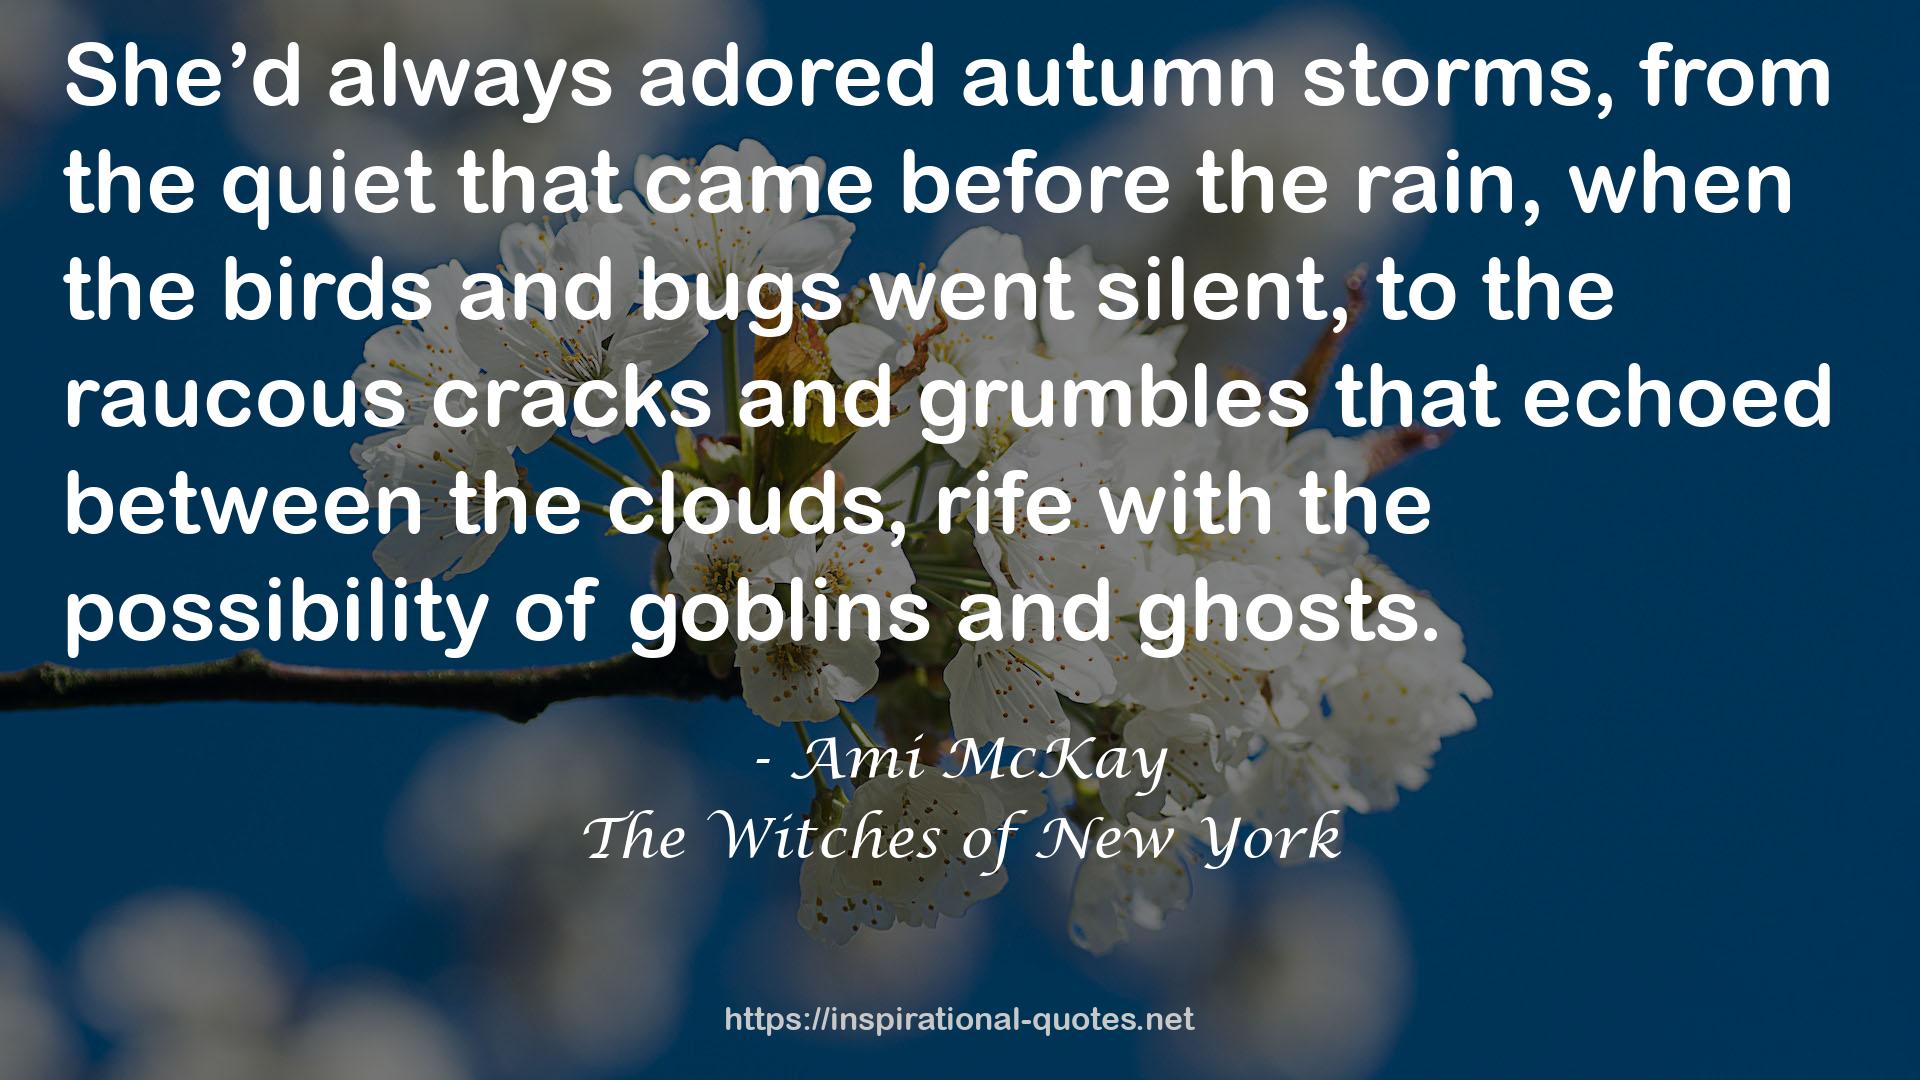 The Witches of New York QUOTES